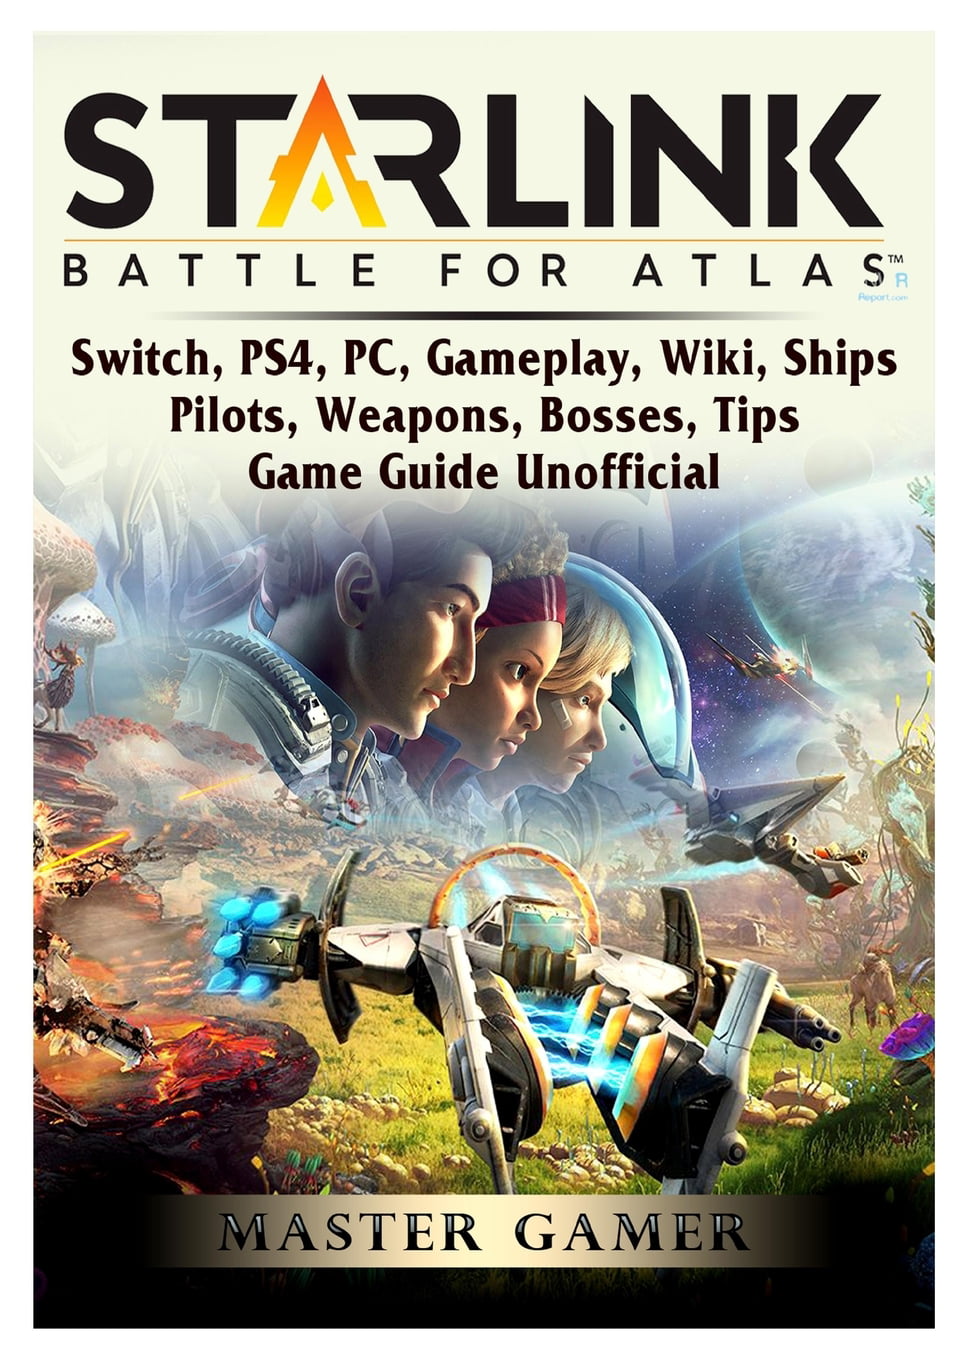 Starlink Battle For Atlas, PC, Gameplay, Wiki, Ships, Pilots, Weapons, Bosses, Tips, Game Guide Unofficial (Paperback)